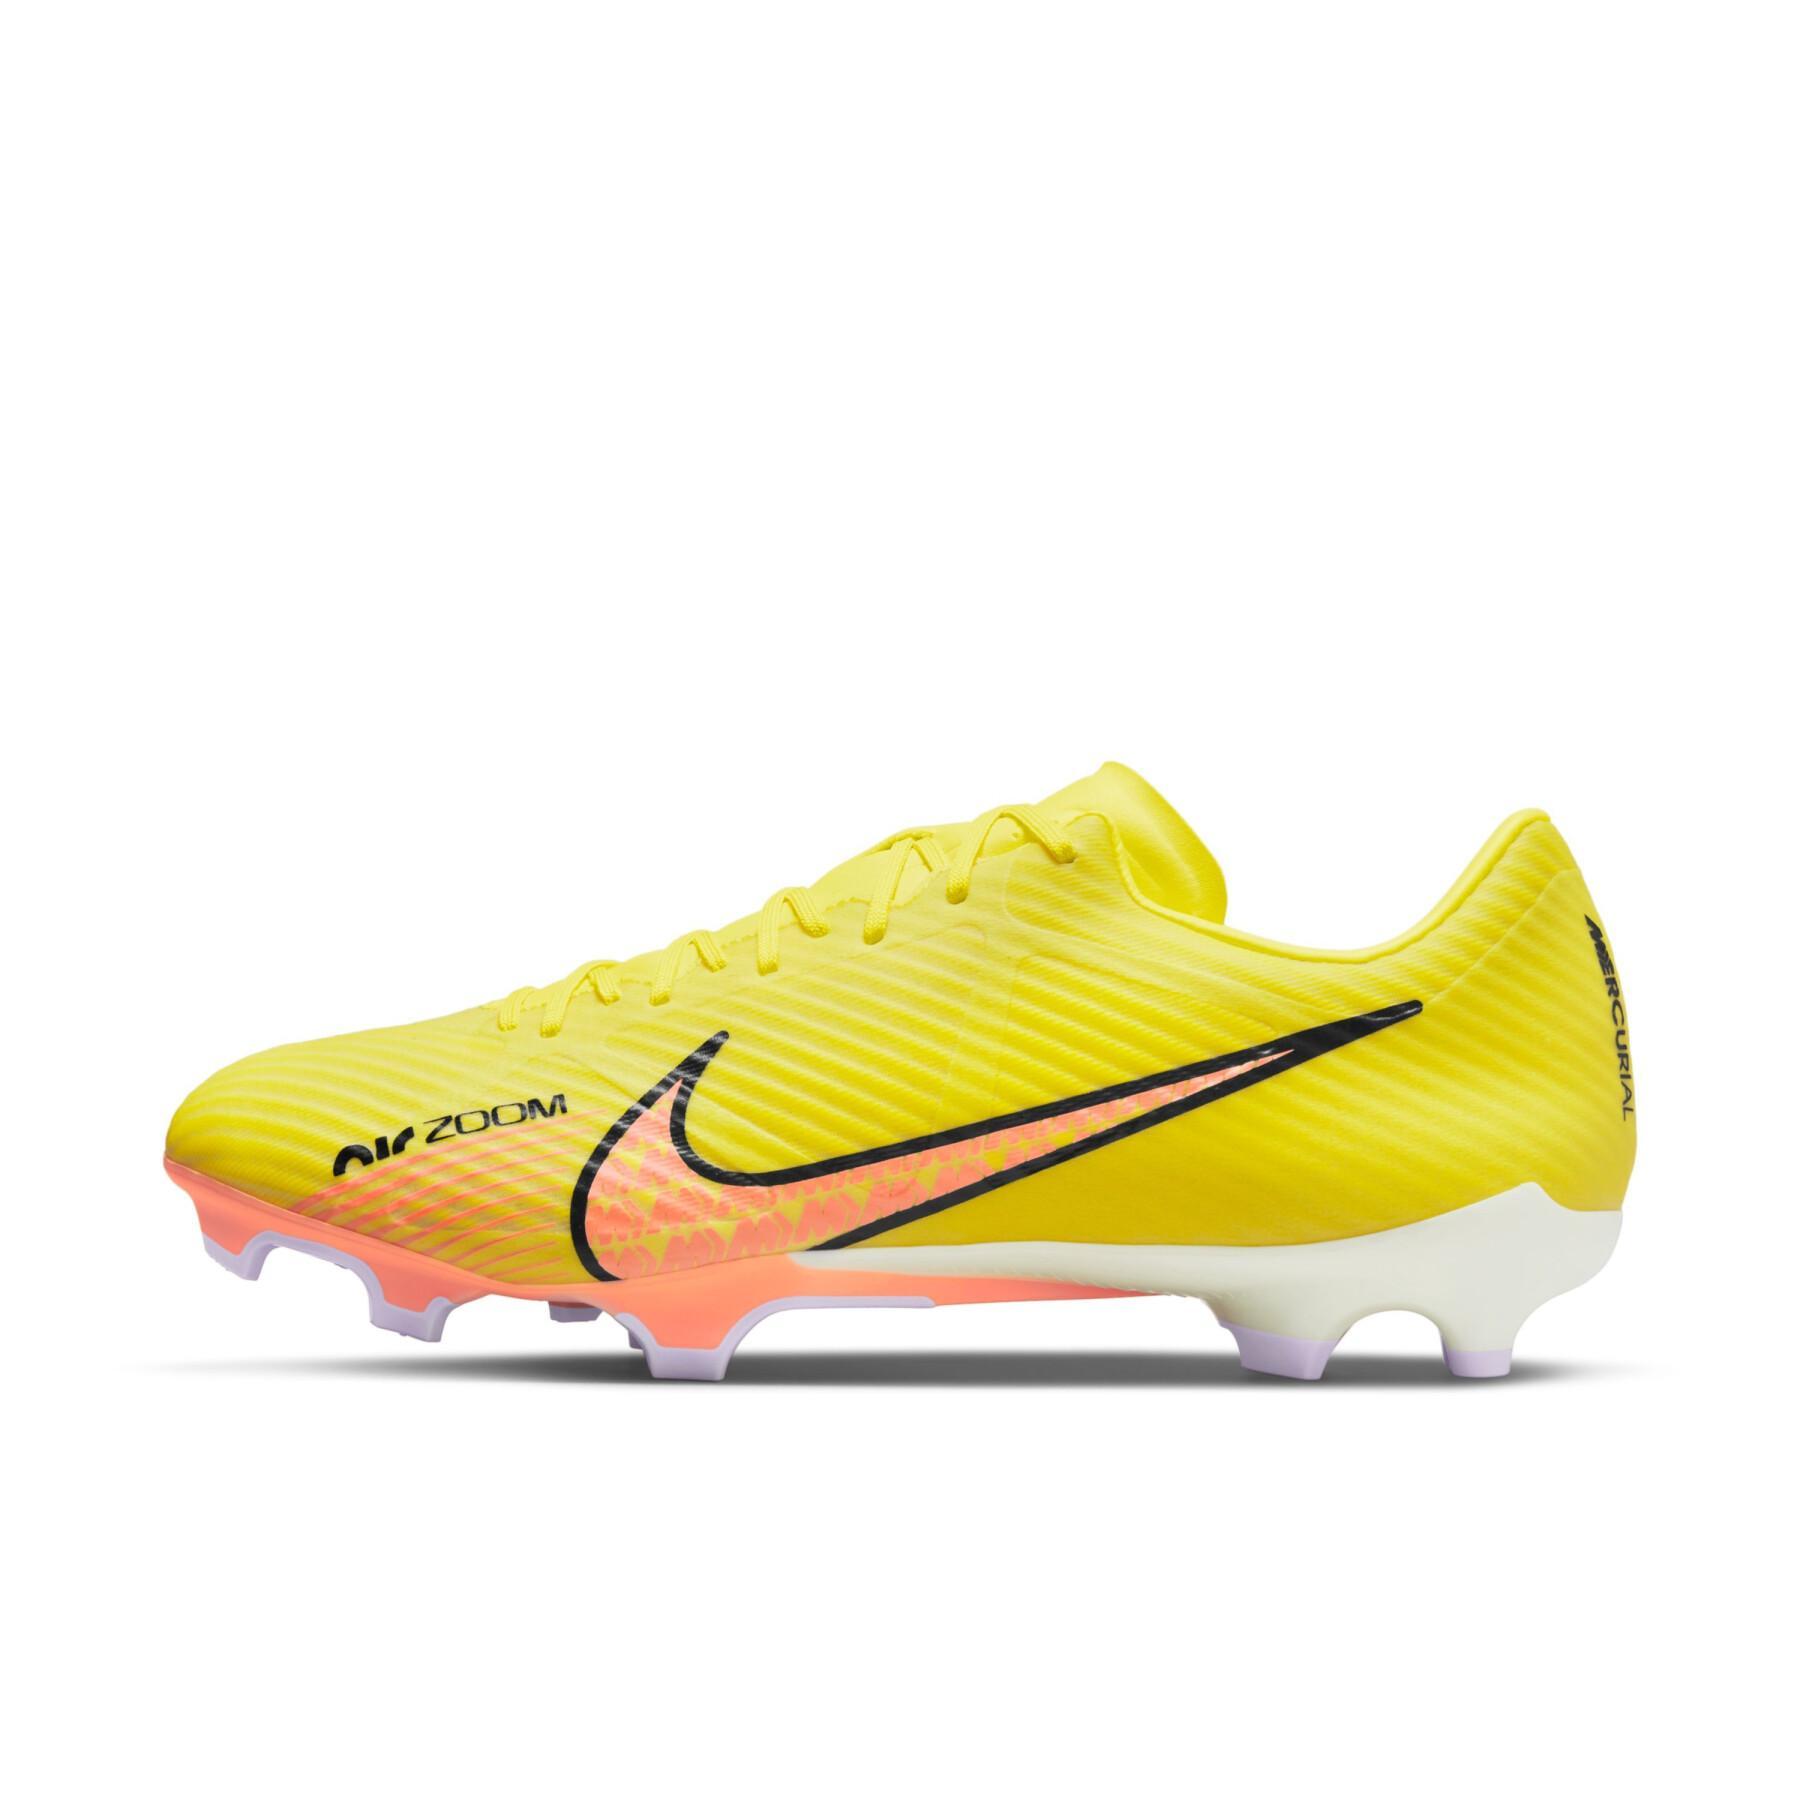 Soccer shoes Nike Zoom Mercurial Vapor 15 Academy MG - Lucent Pack